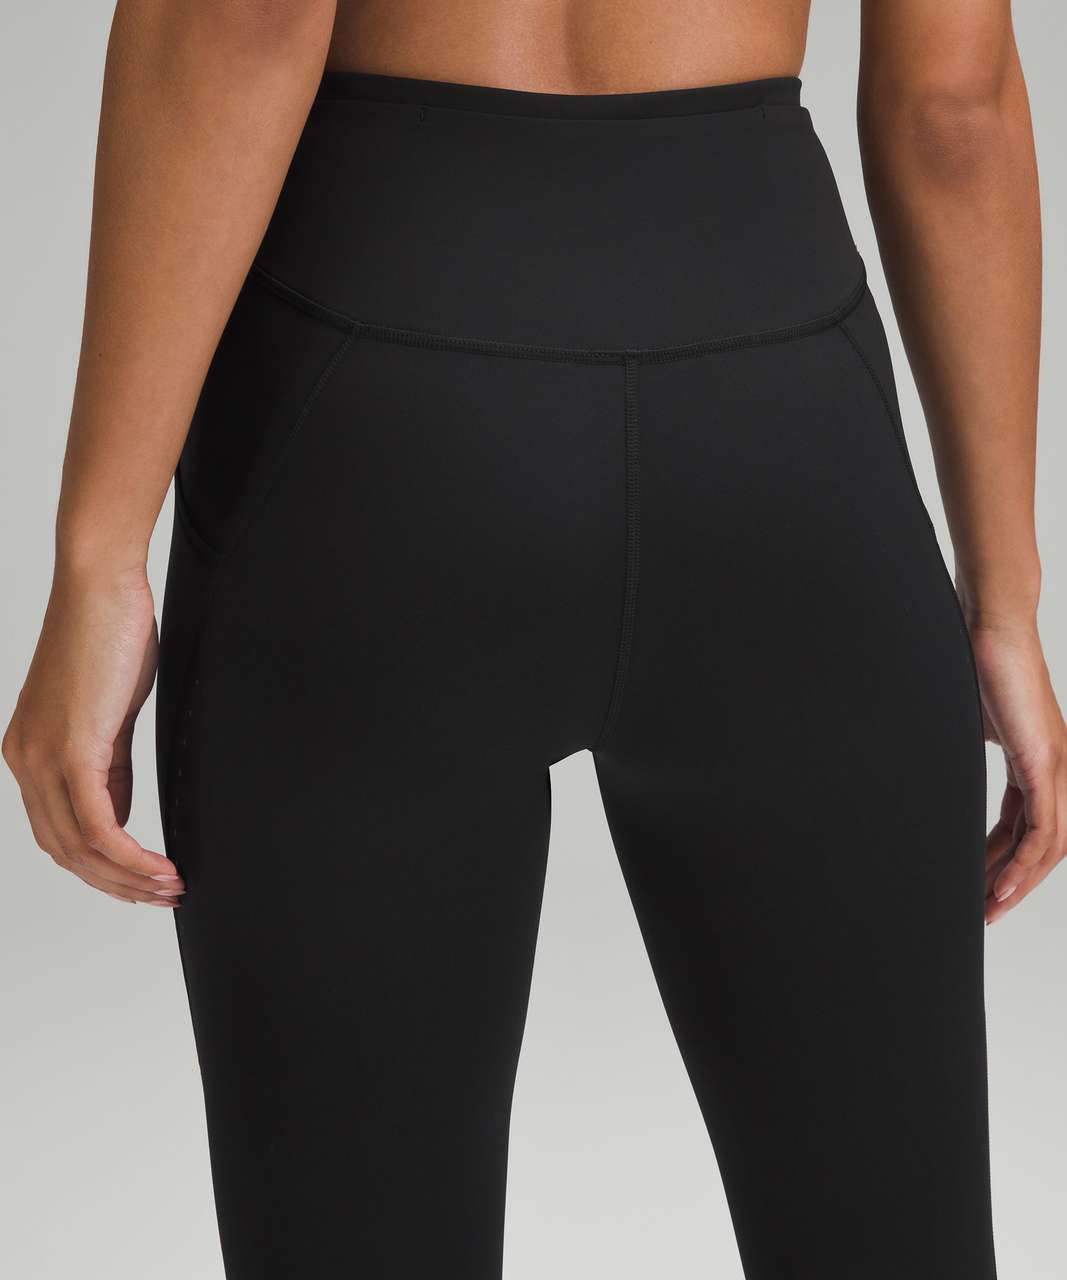 Lululemon Fast and Free leggings in Size 6, Black (w pockets!), Women's  Fashion, Activewear on Carousell